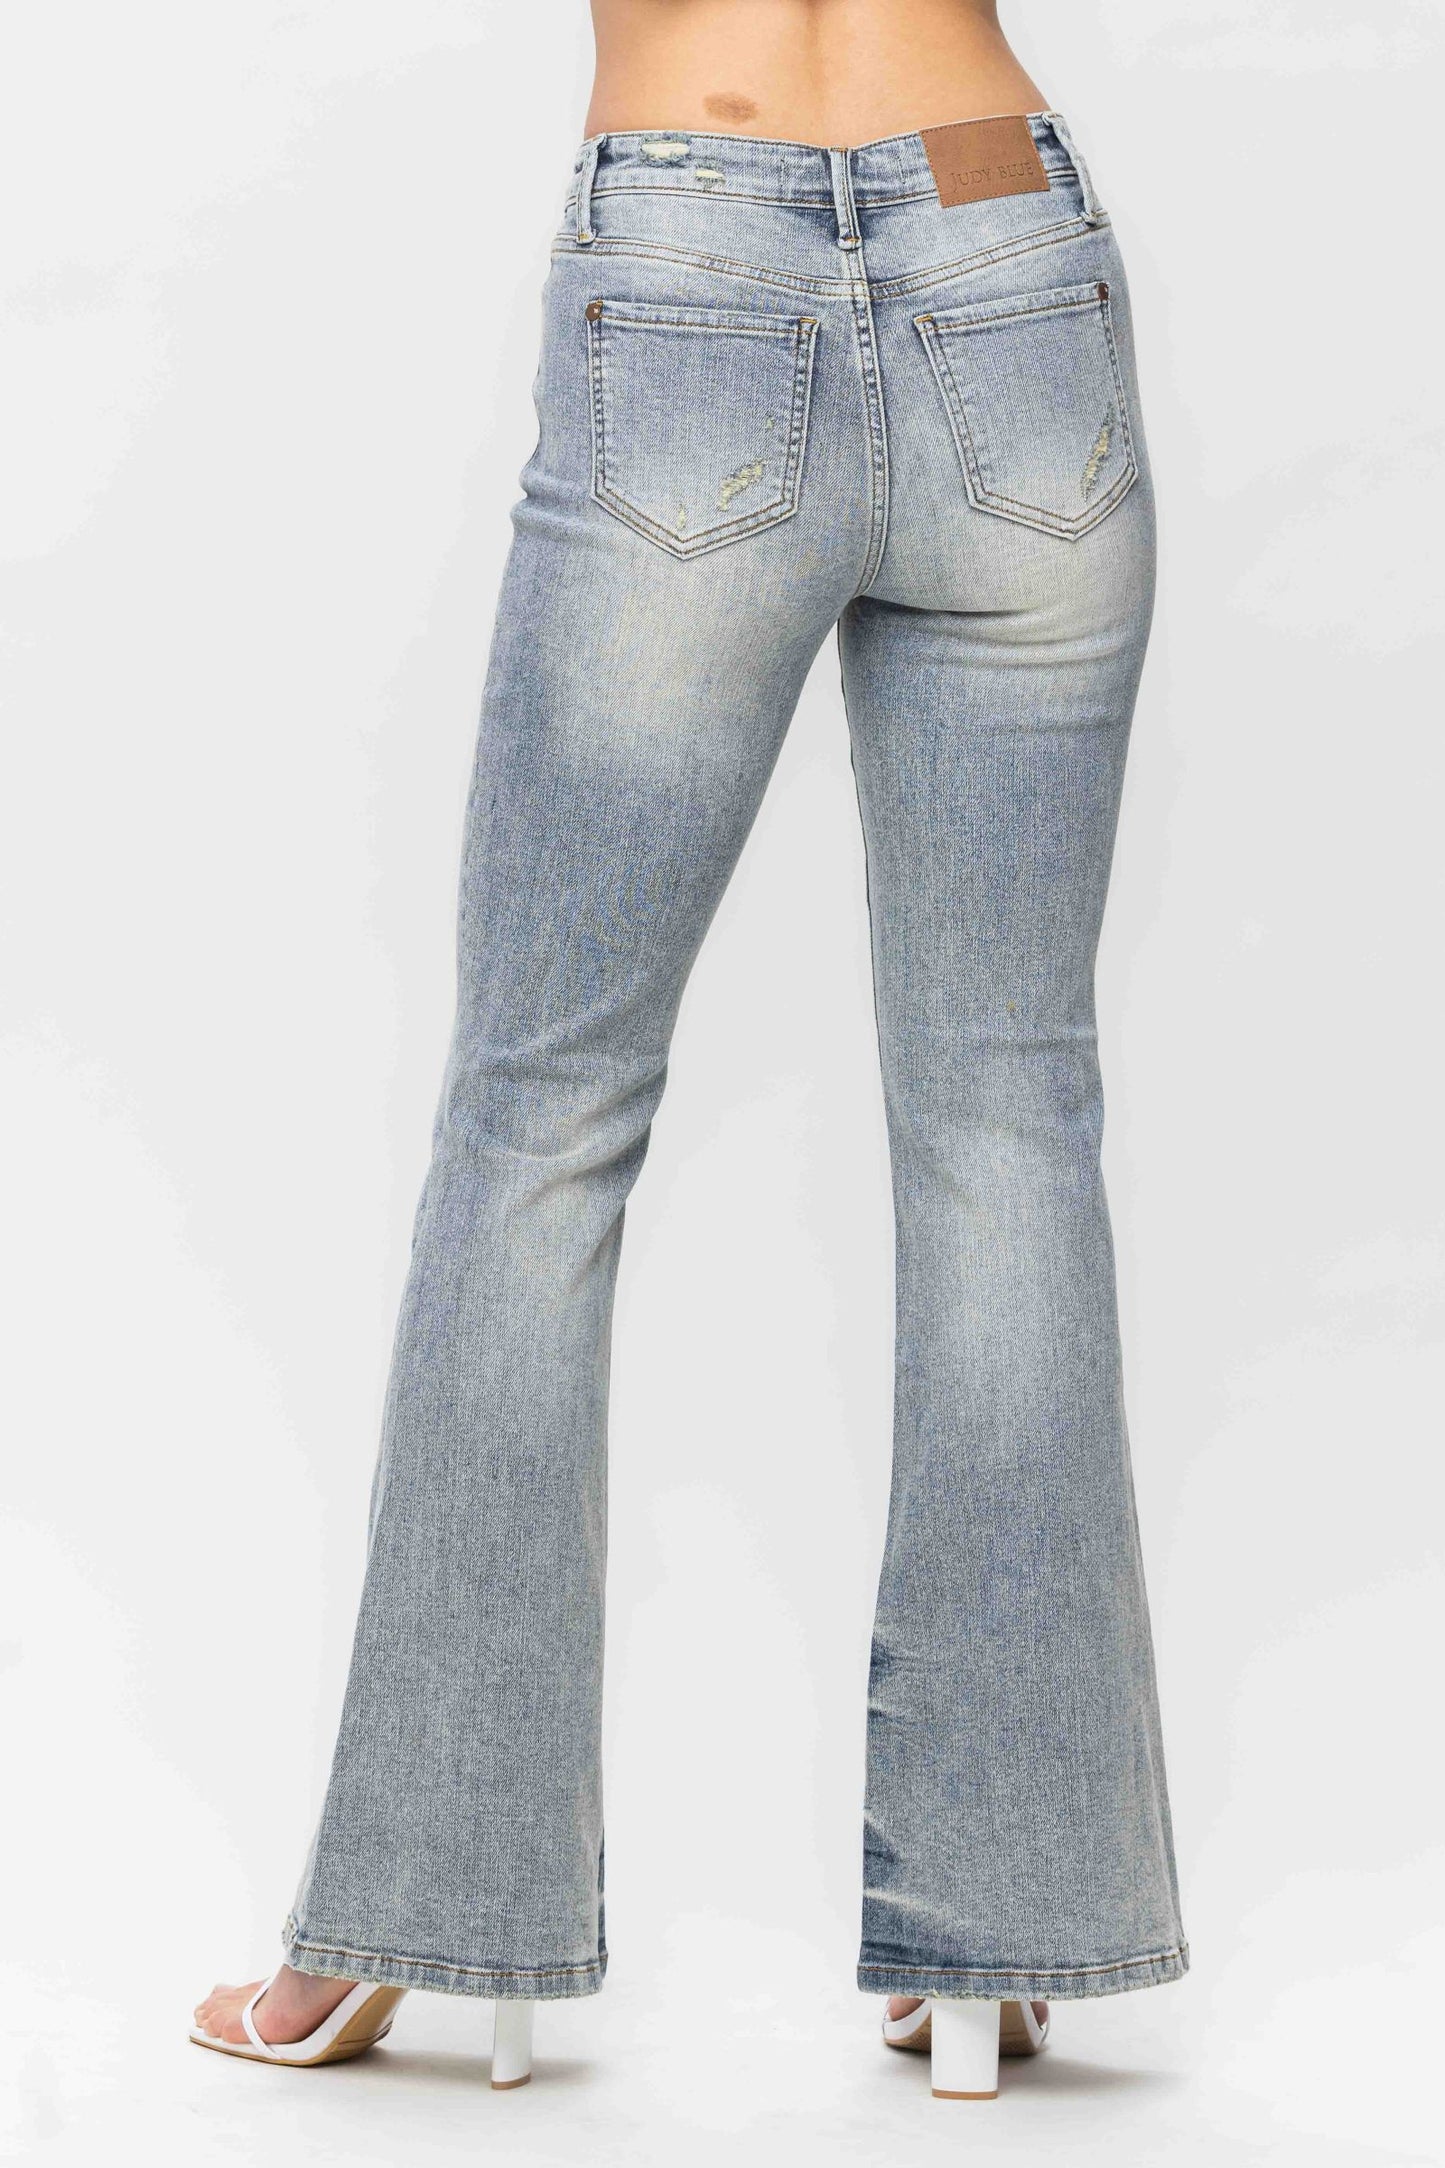 Judy Blue Mid-Rise Tinted Pin Tack Flare Denim Jeans